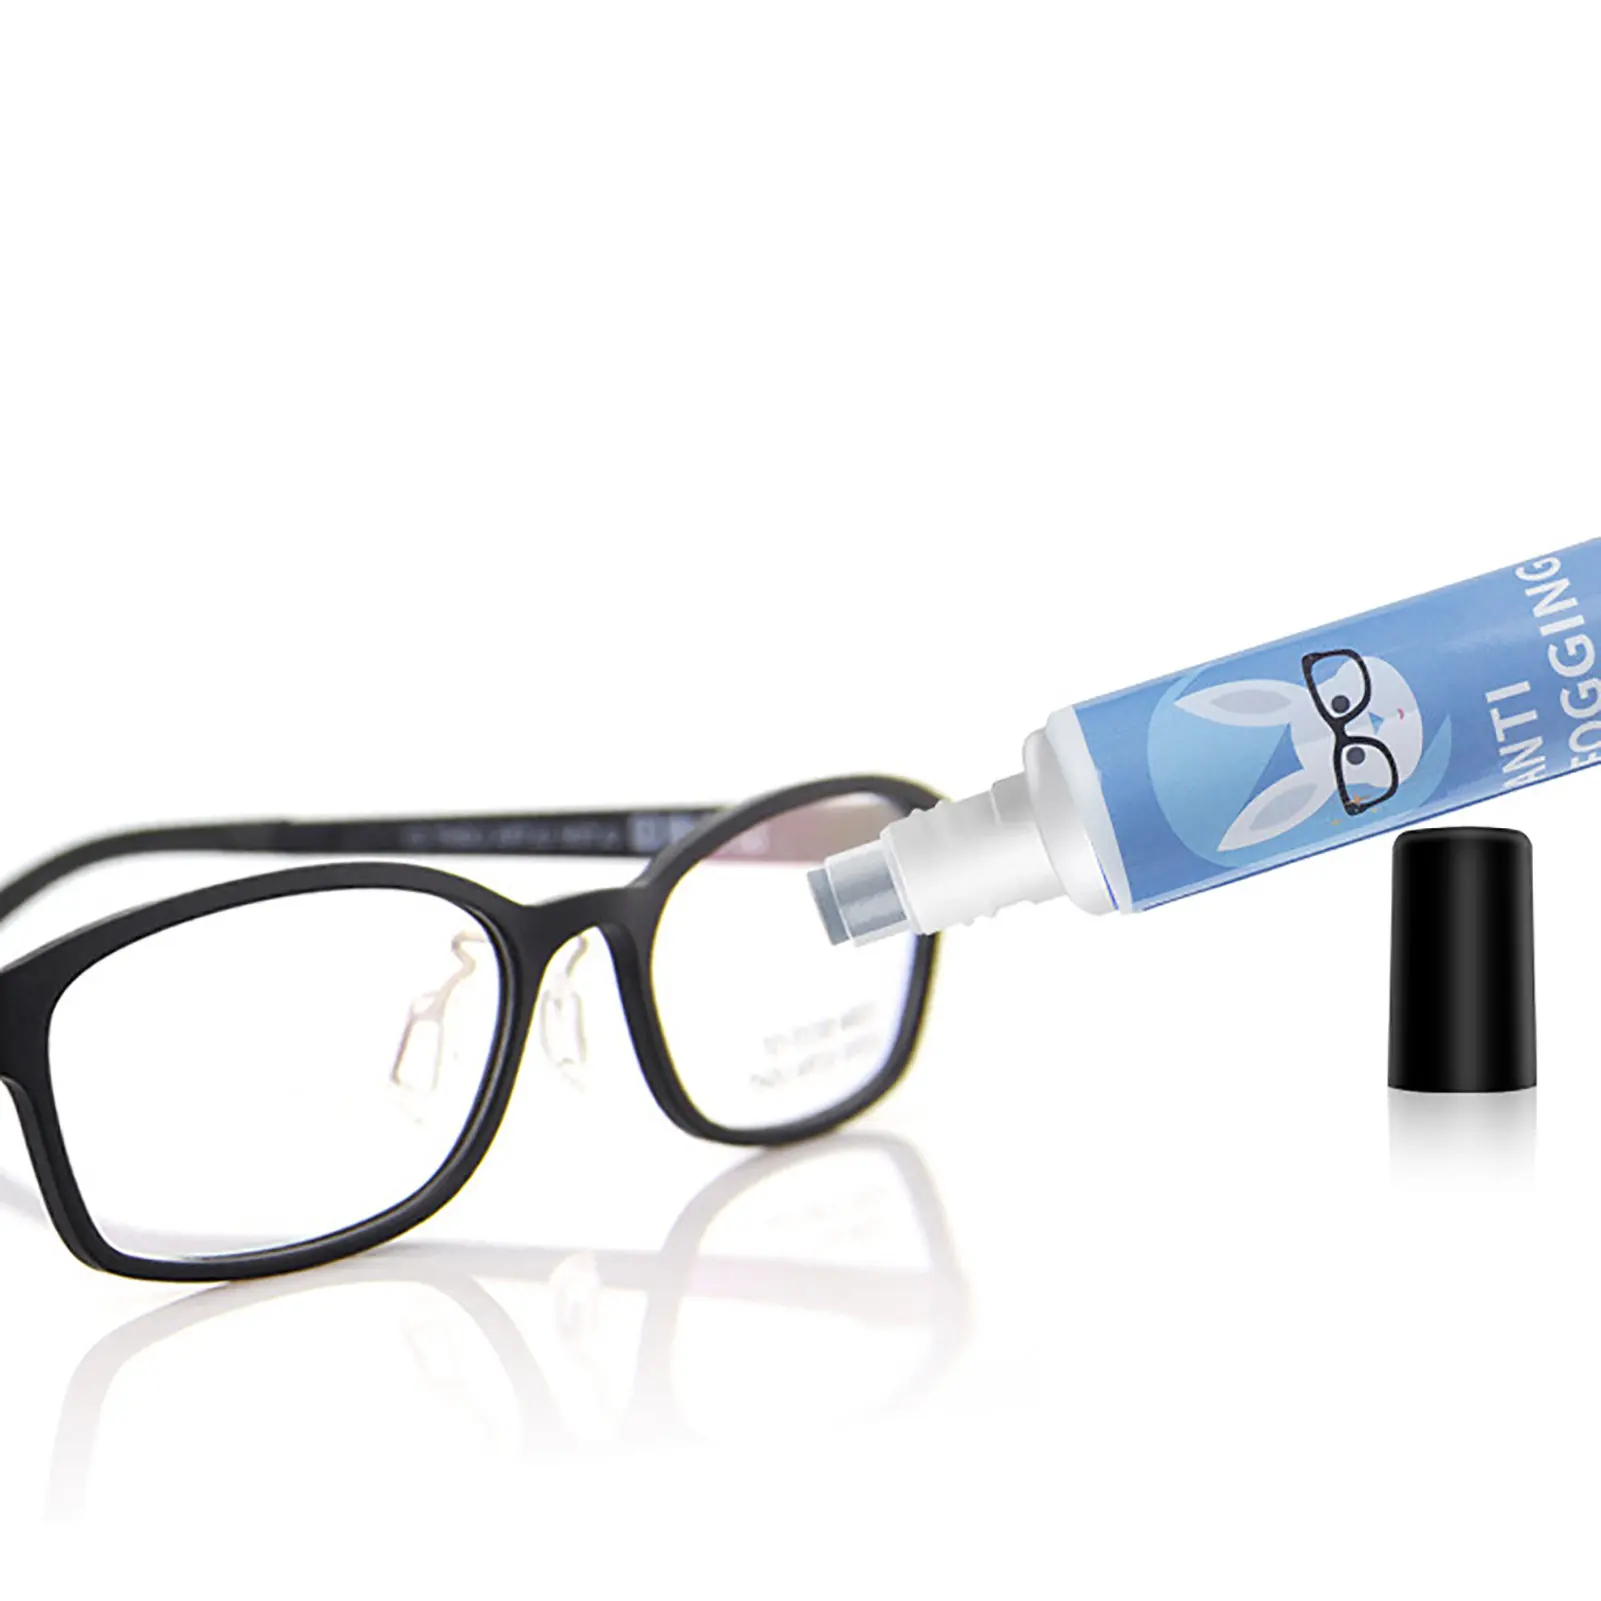 

Anti-Fog Sprayer For Mirror Long-Lasting Defogger Agent Prevents Fogging On Glasses Water Protective Coating Agent For Window